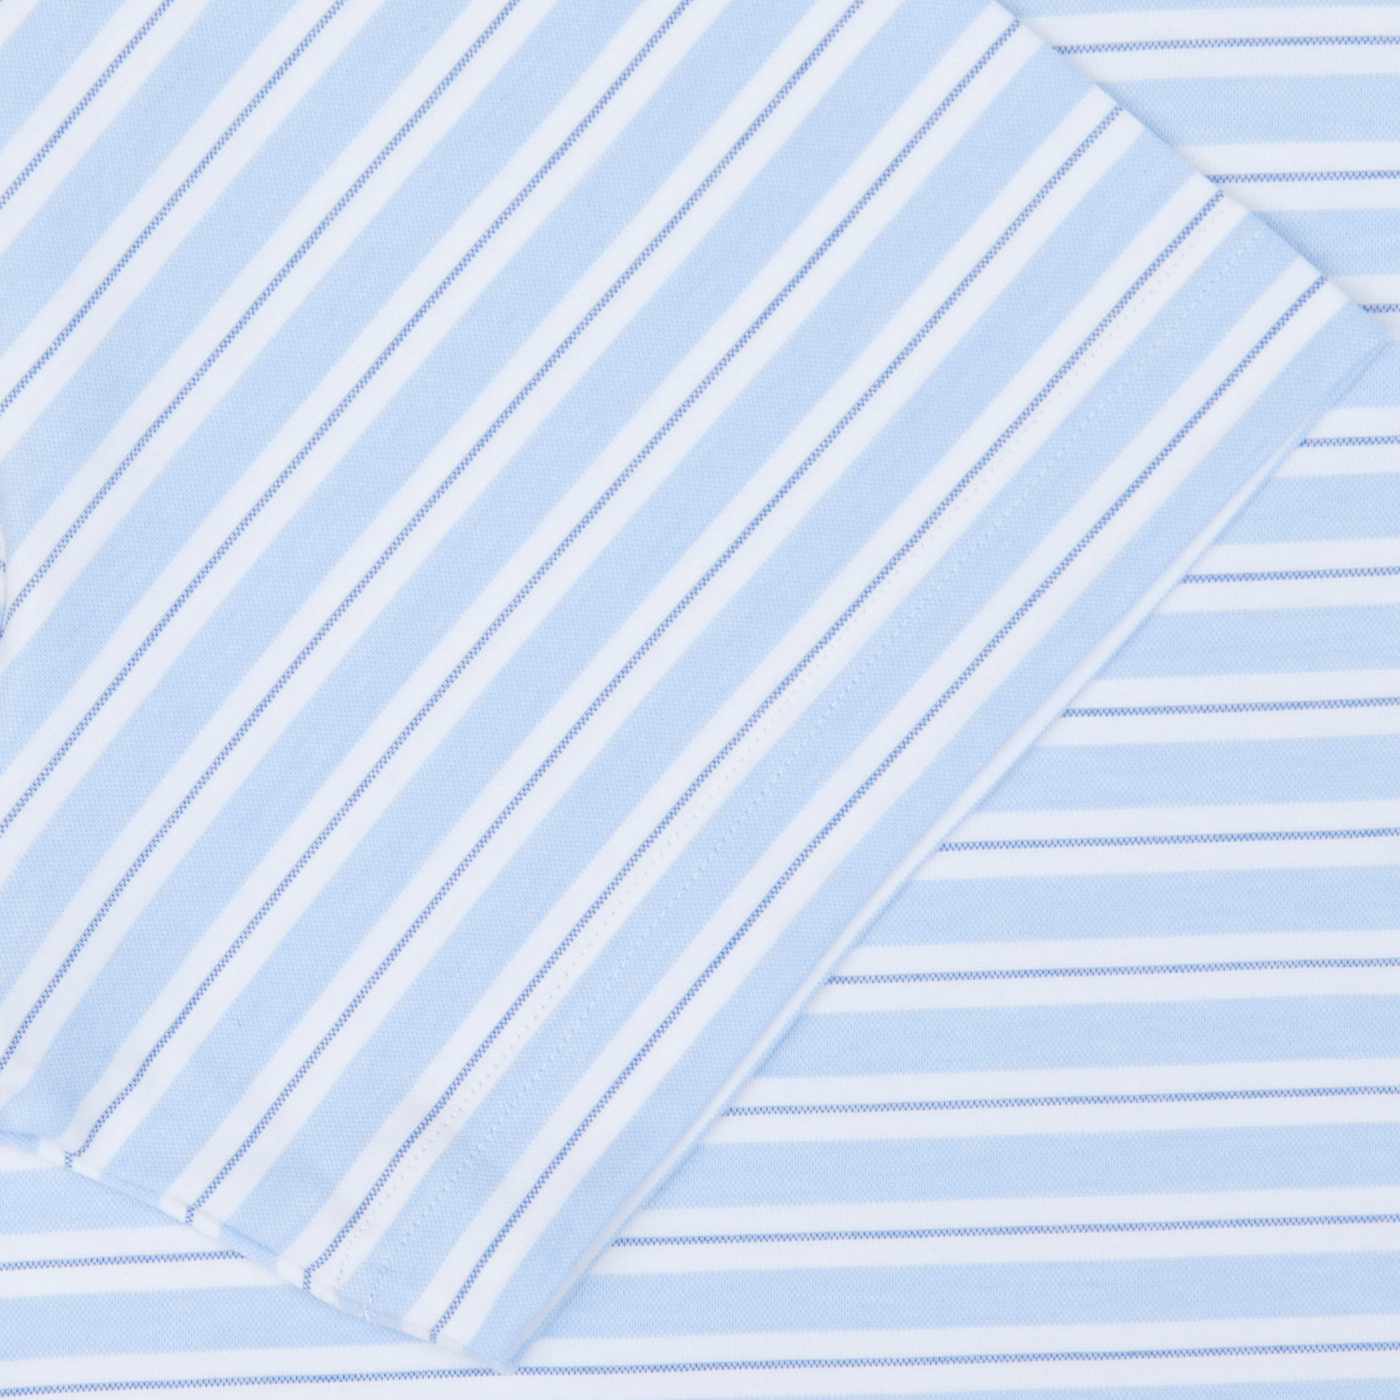 Blue and white striped Fedeli cotton-nylon blend fabric arranged diagonally with a folded edge visible.